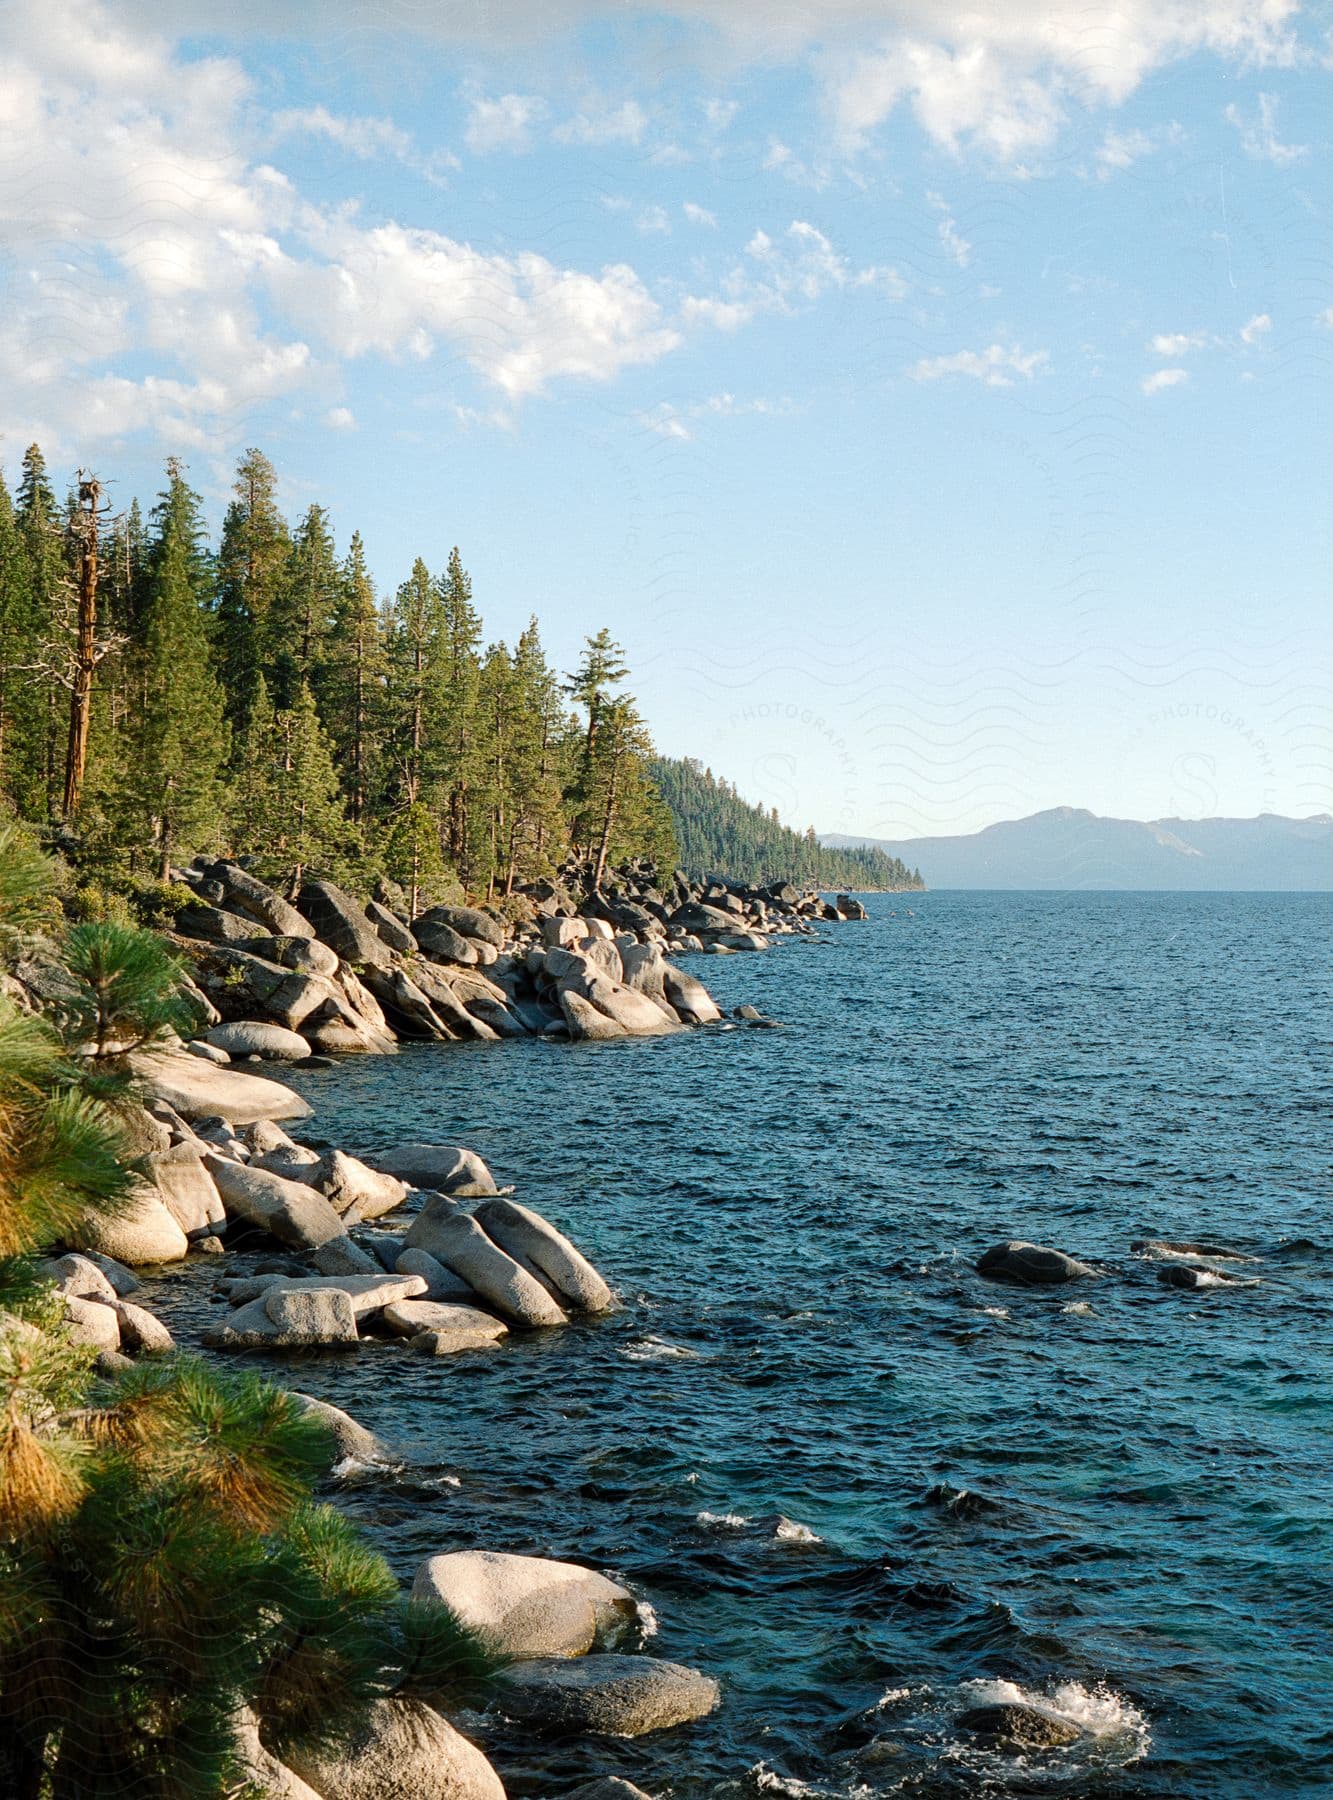 A serene scene of a lake with blue water, surrounded by a rocky shore and pine trees, with mountains in the background.